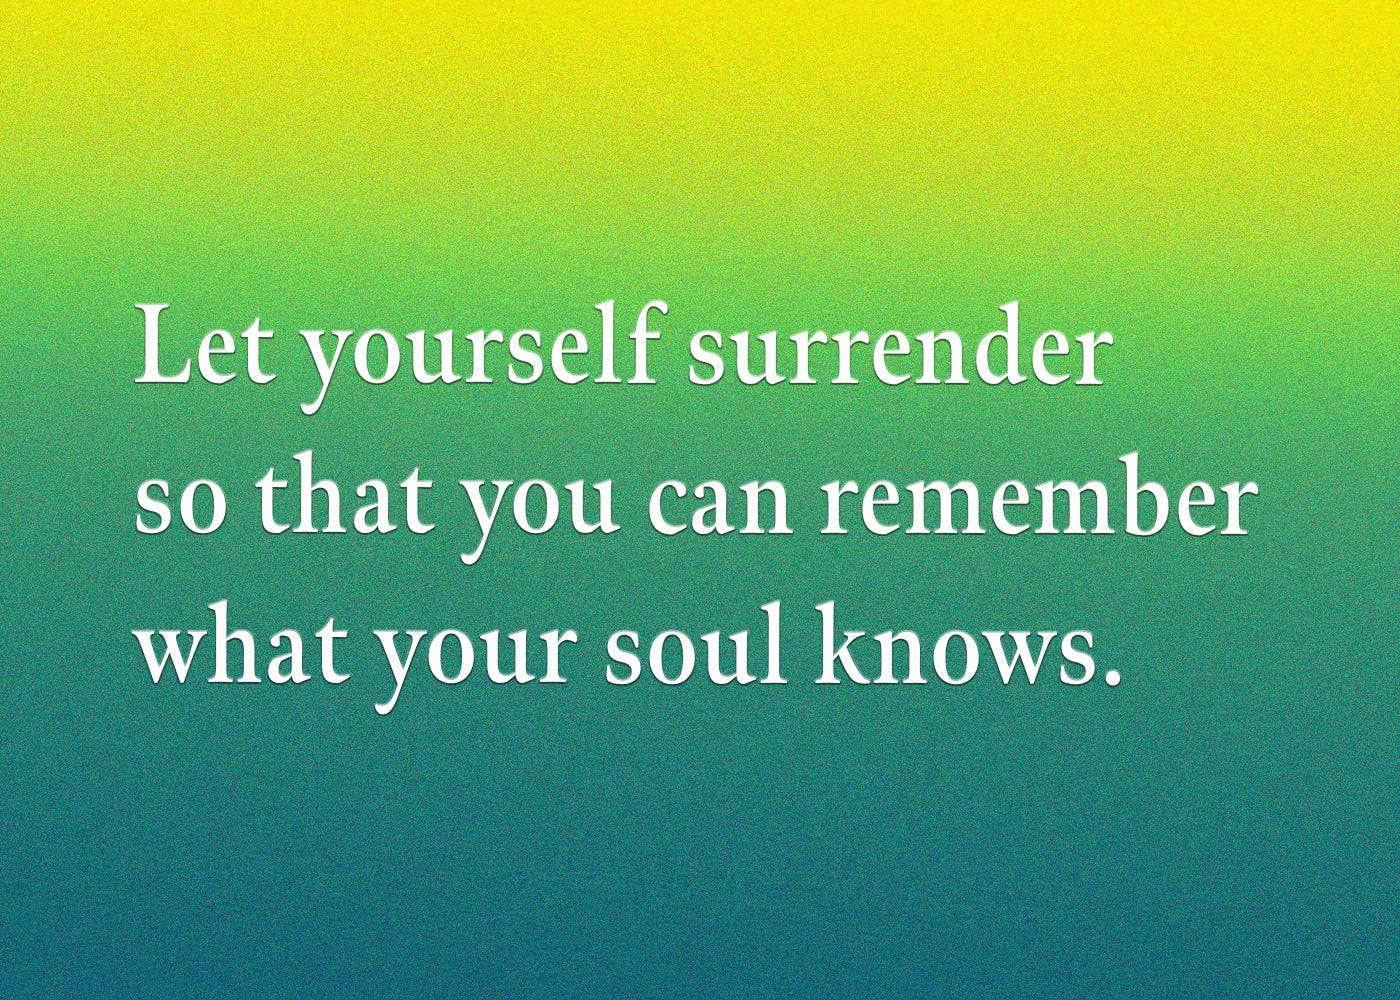 let yourself surrender so that you can remember what your soul knows